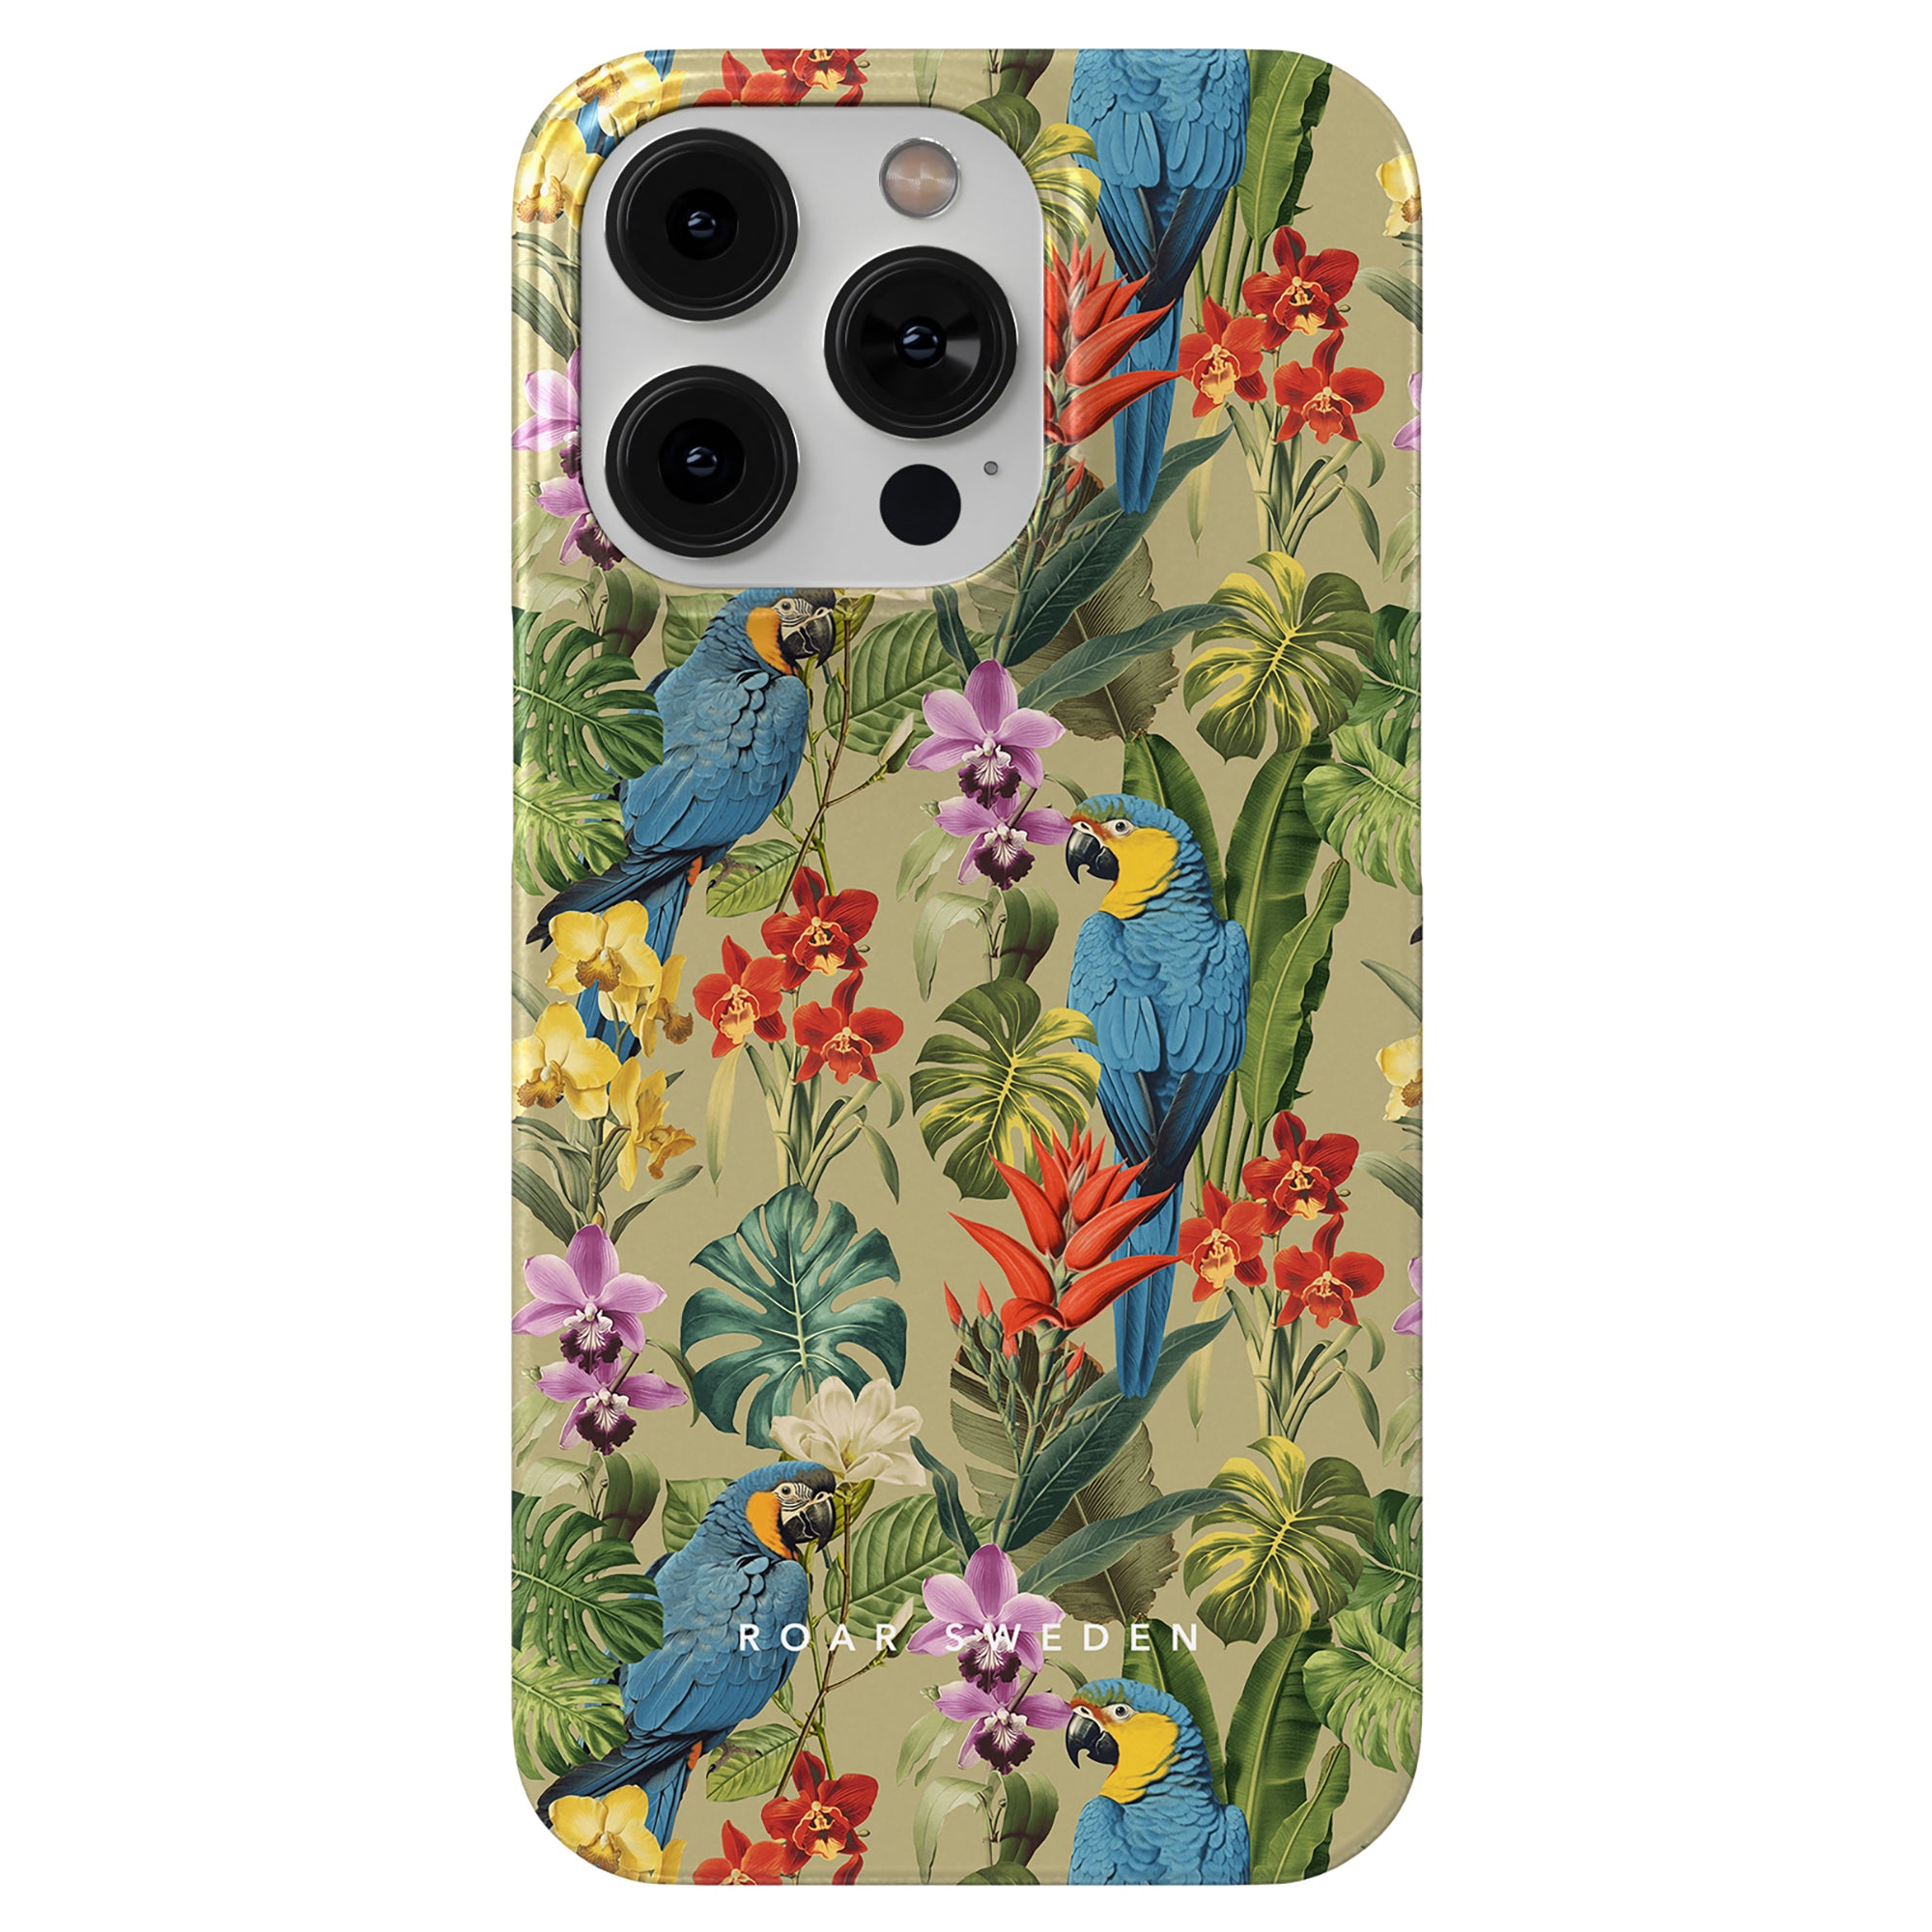 A smartphone with a Verdant Beauty - Slim case from the Birds Collection, showcasing blue and yellow parrots among tropical leaves and flowers. The case is labeled "ROAR SWEDEN.